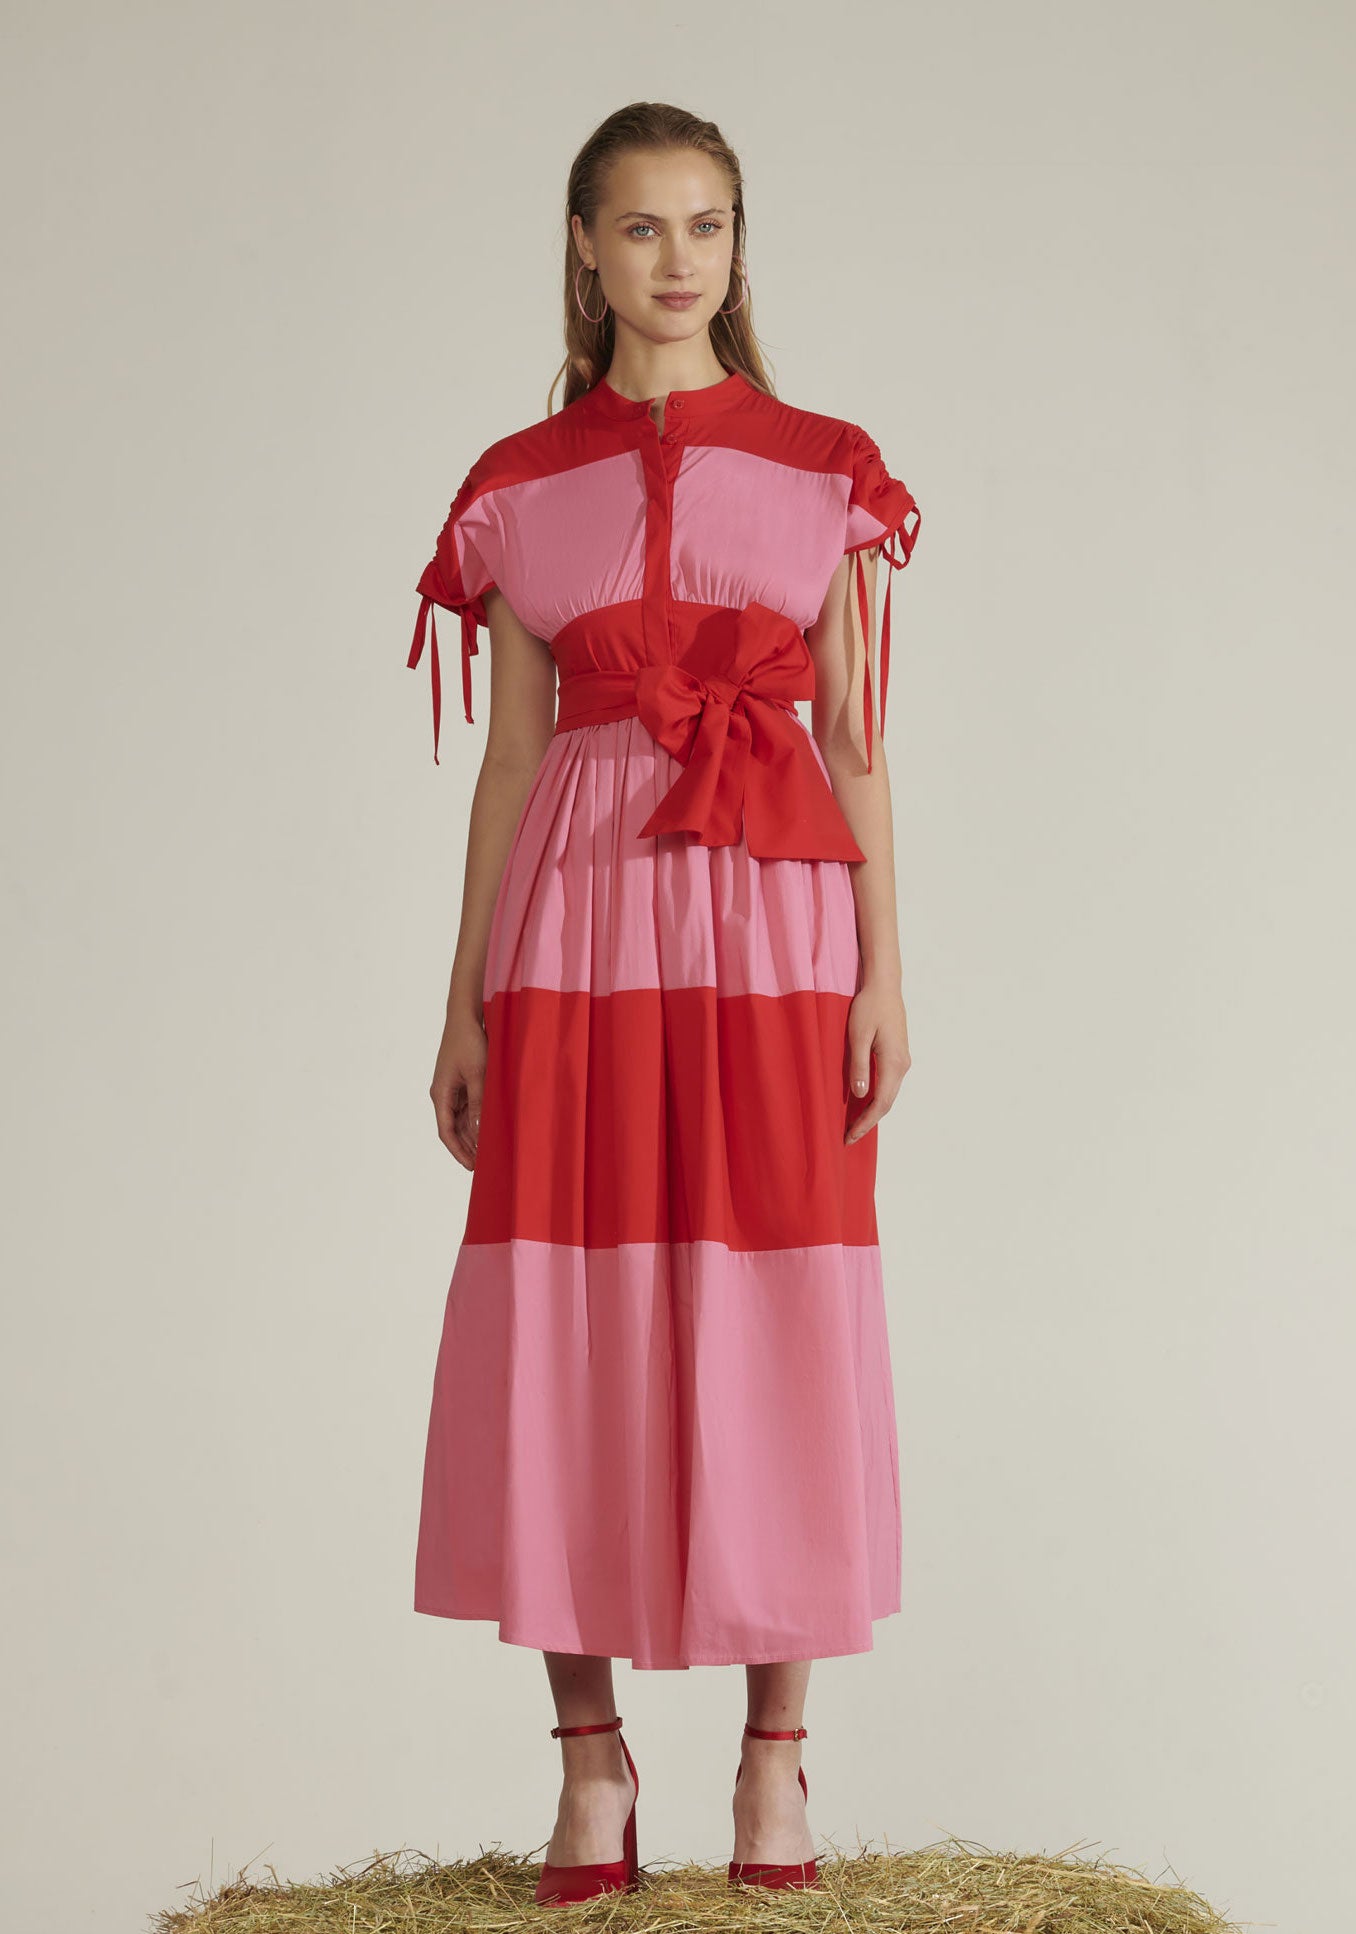 Red and Pink Striped Dress With Belt